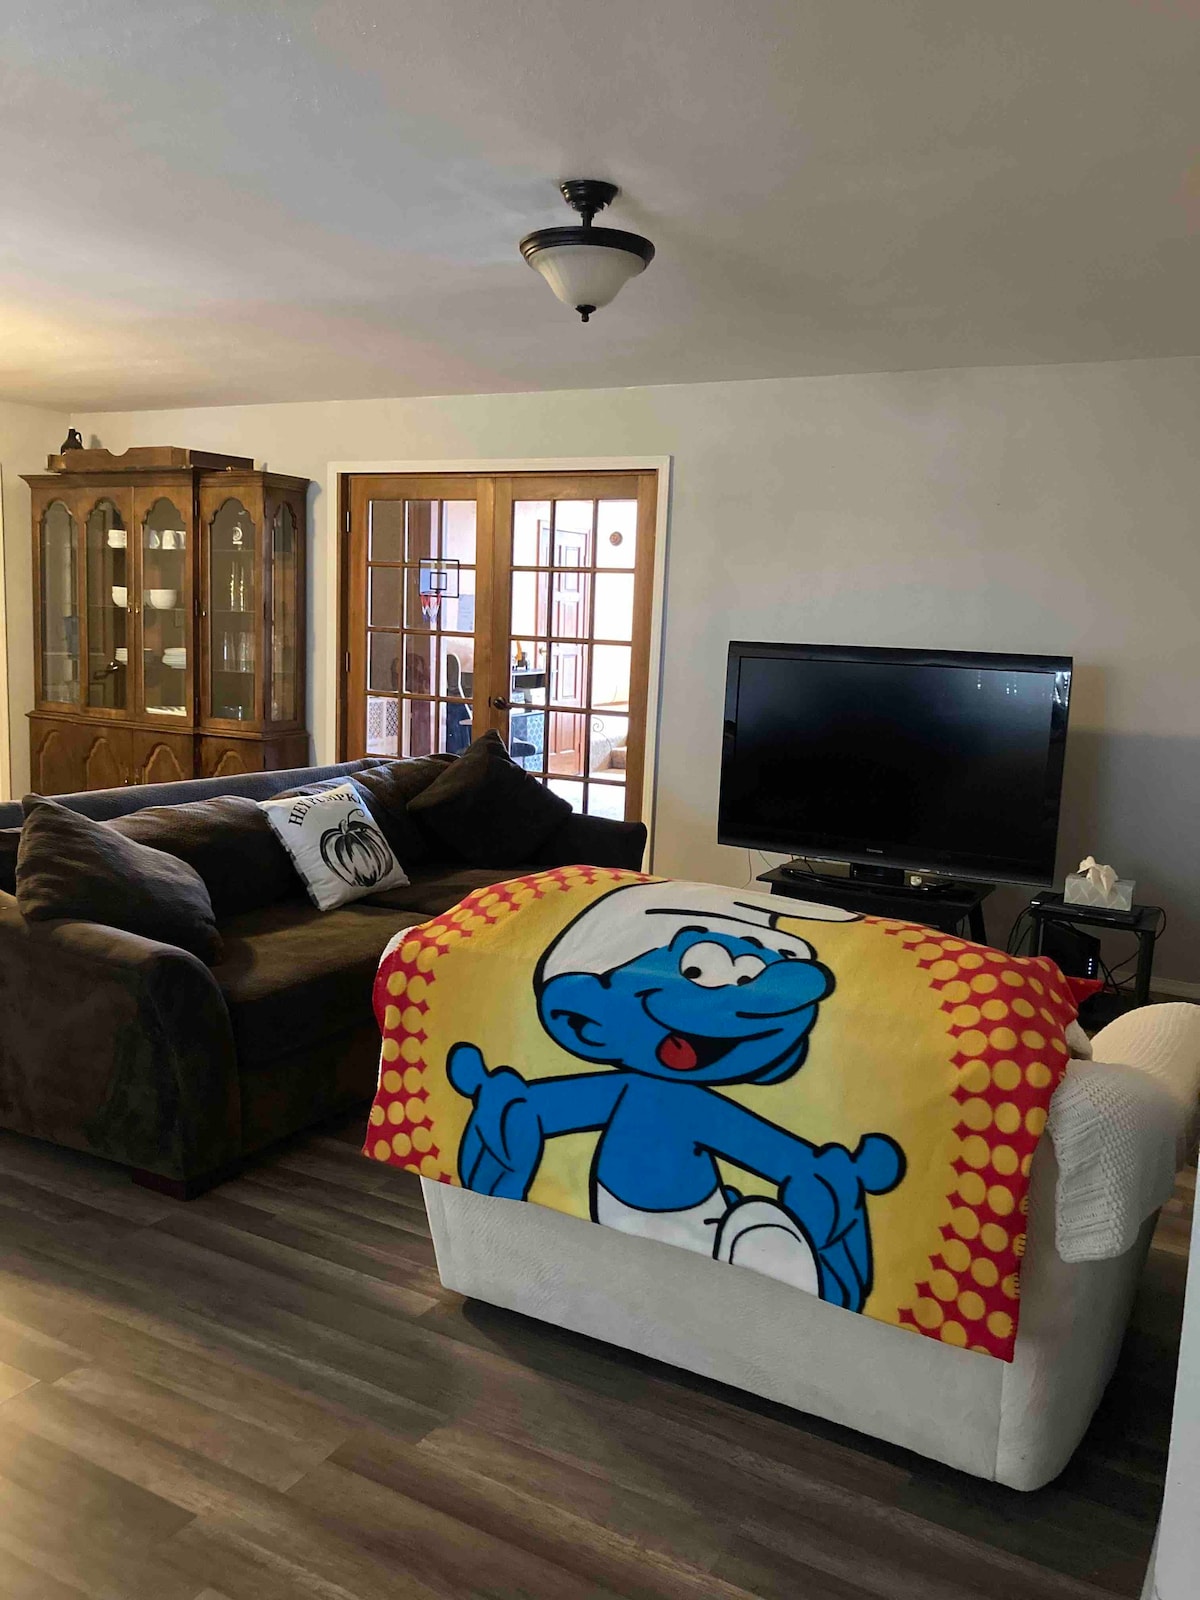 The smurf house!